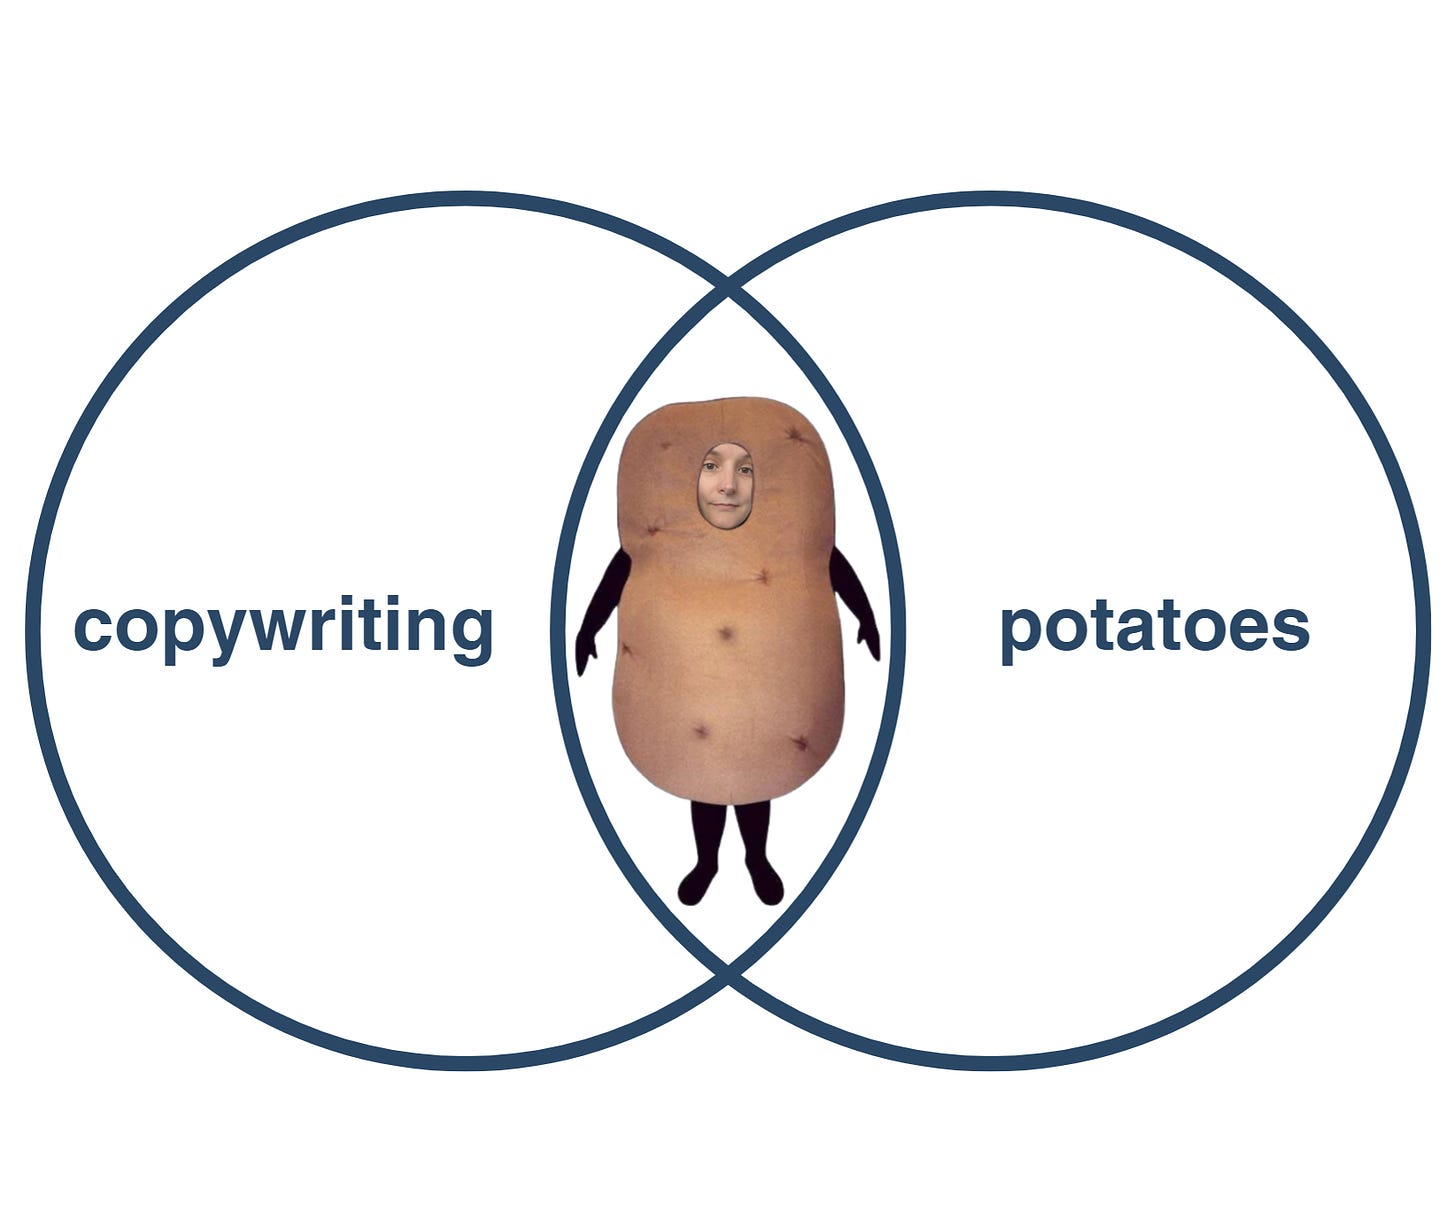 A Venn diagram showing copywriting on the left, potatoes on the right, and me dressed as a potato in the middle